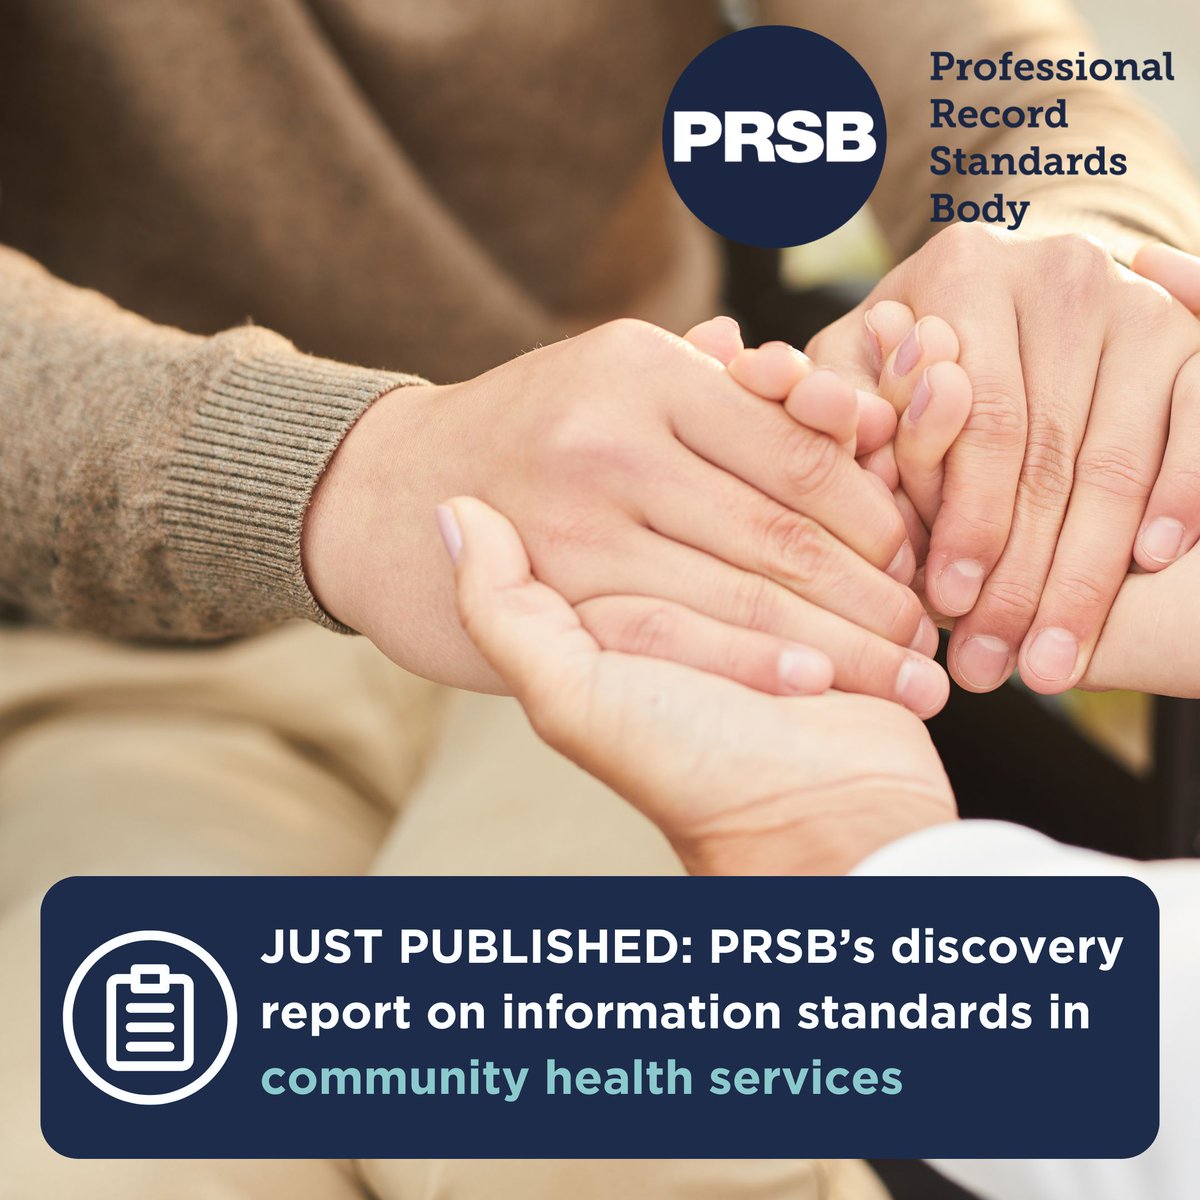 1/2📣The PRSB has published a discovery report on information standards and opportunities to improve care within the #CommunityHealth services. The report is based on findings from consultation with service users, service providers & IT system suppliers: theprsb.org/community-heal…